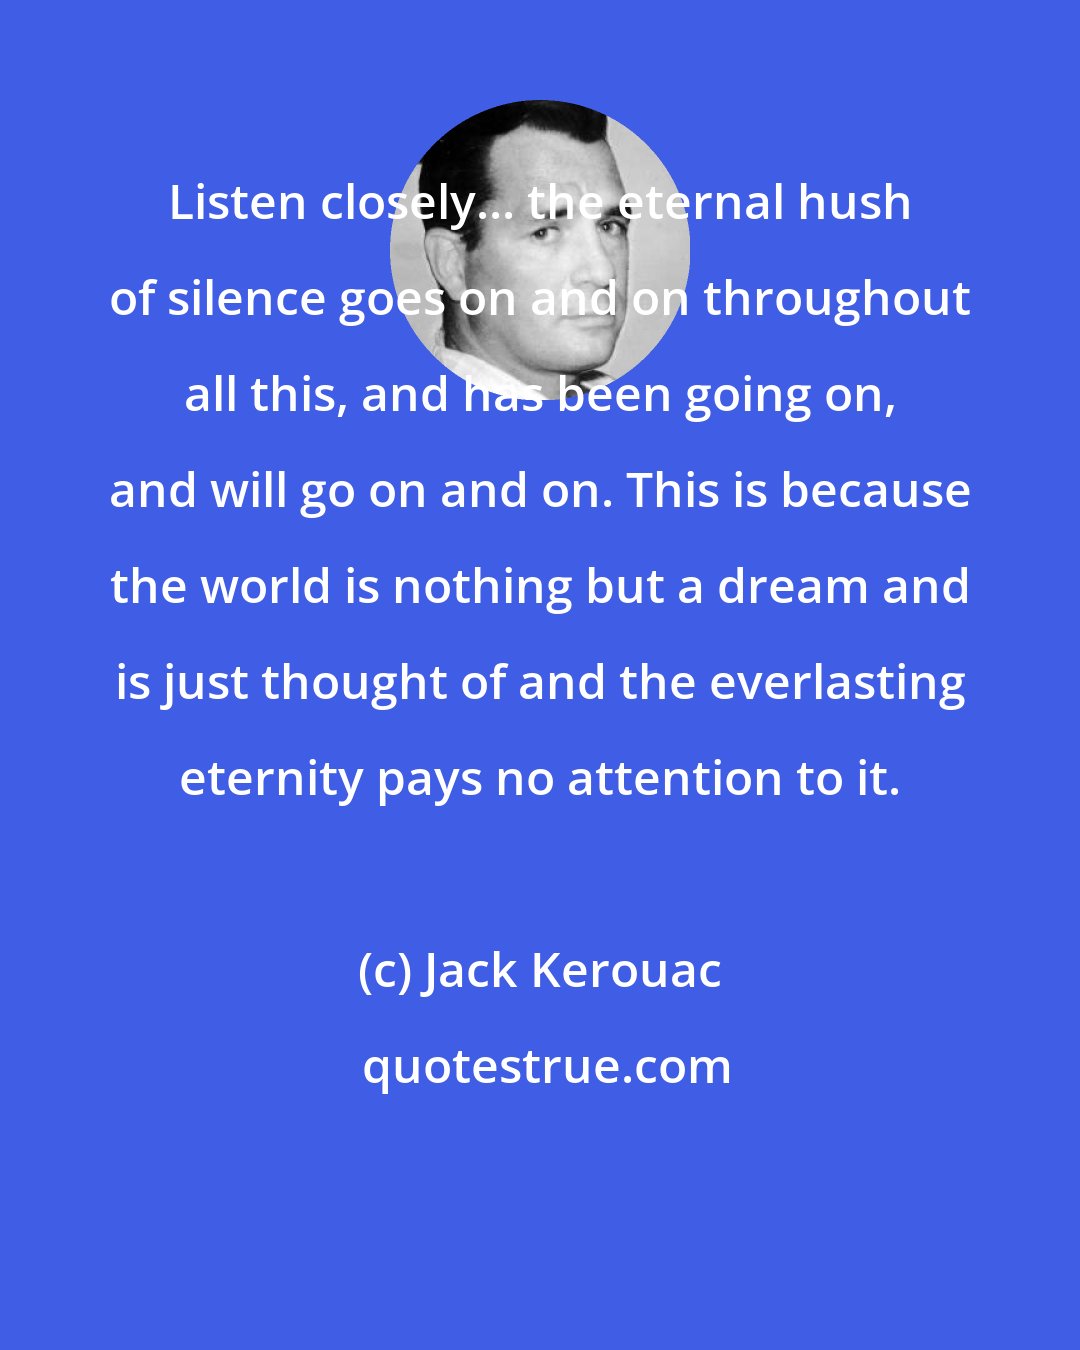 Jack Kerouac: Listen closely... the eternal hush of silence goes on and on throughout all this, and has been going on, and will go on and on. This is because the world is nothing but a dream and is just thought of and the everlasting eternity pays no attention to it.